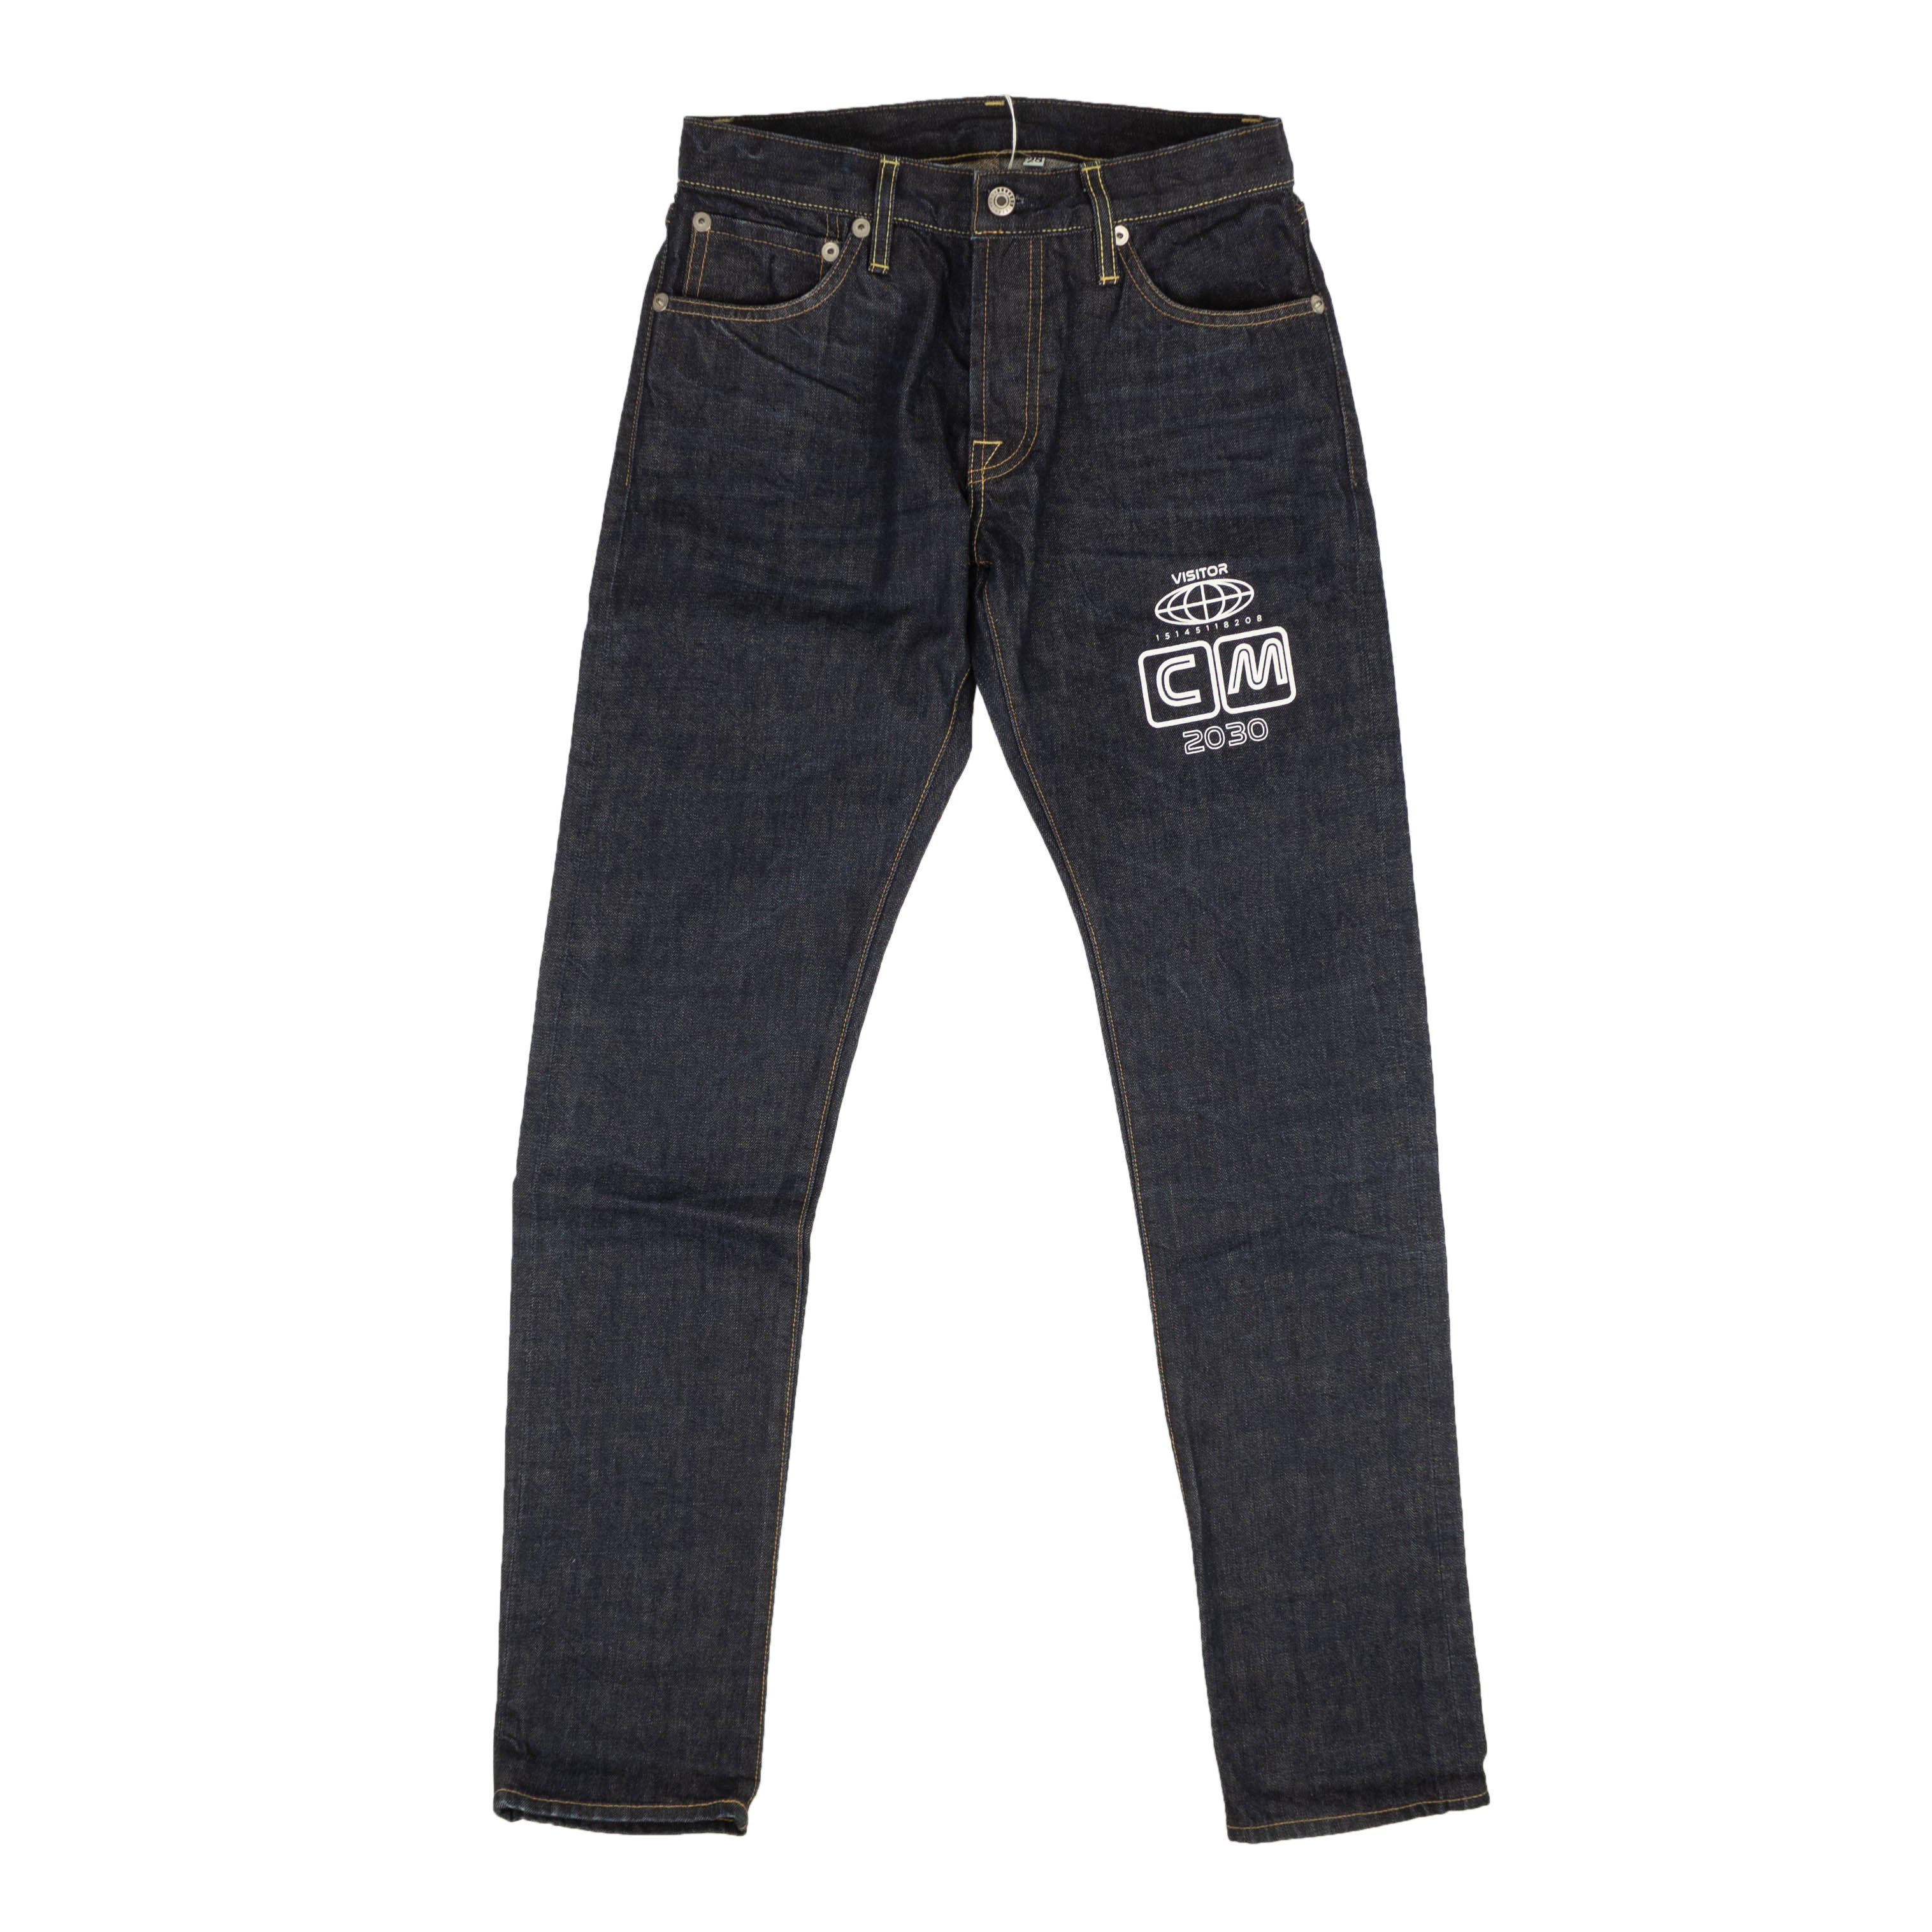 Visitor On Earth Logo Jeans - Navy Blue